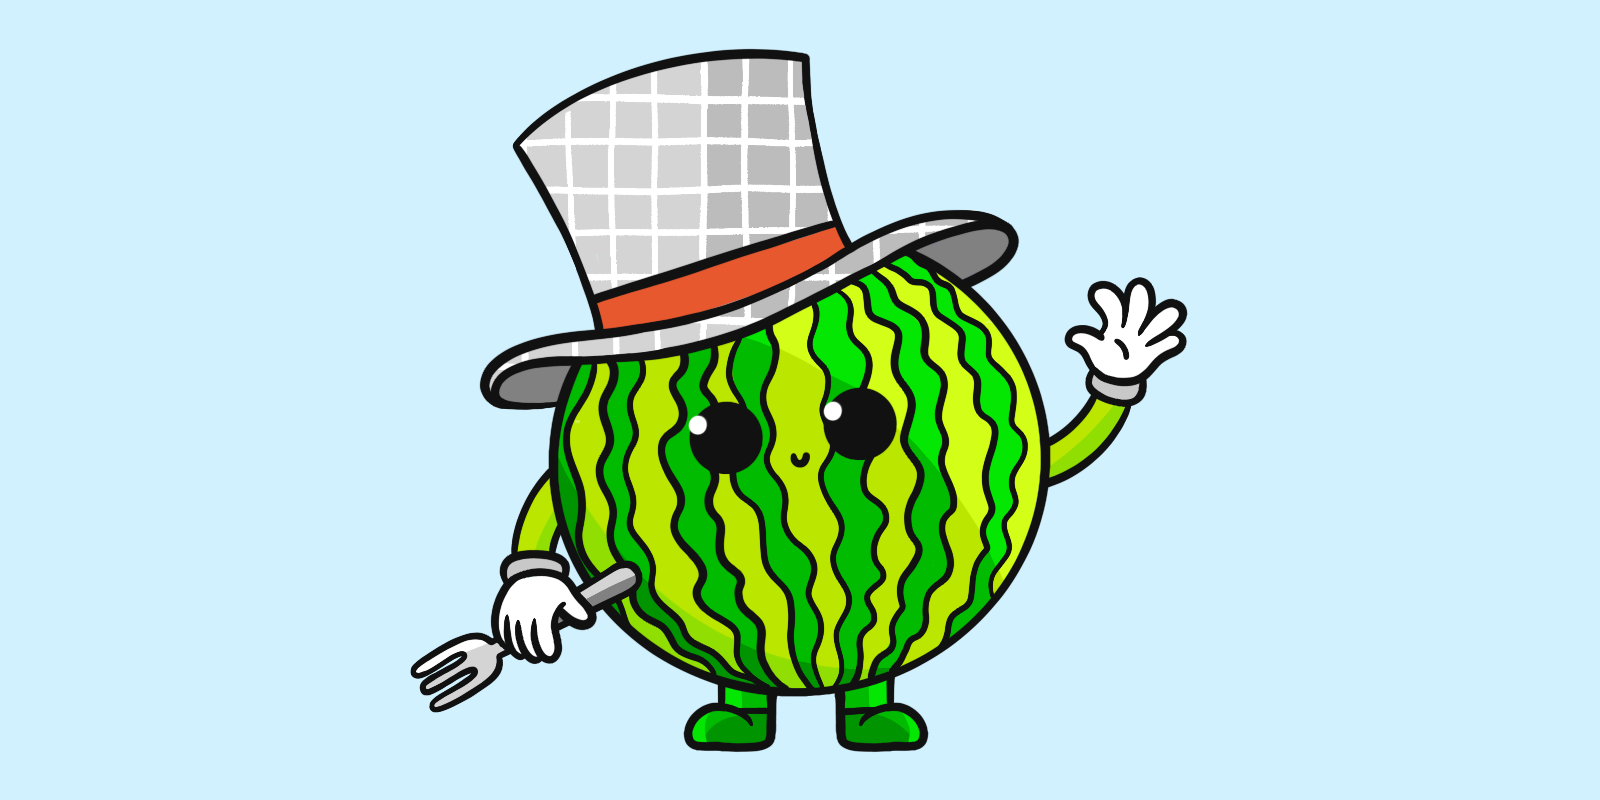 An illustration of a magic watermelon over an orphan blue background